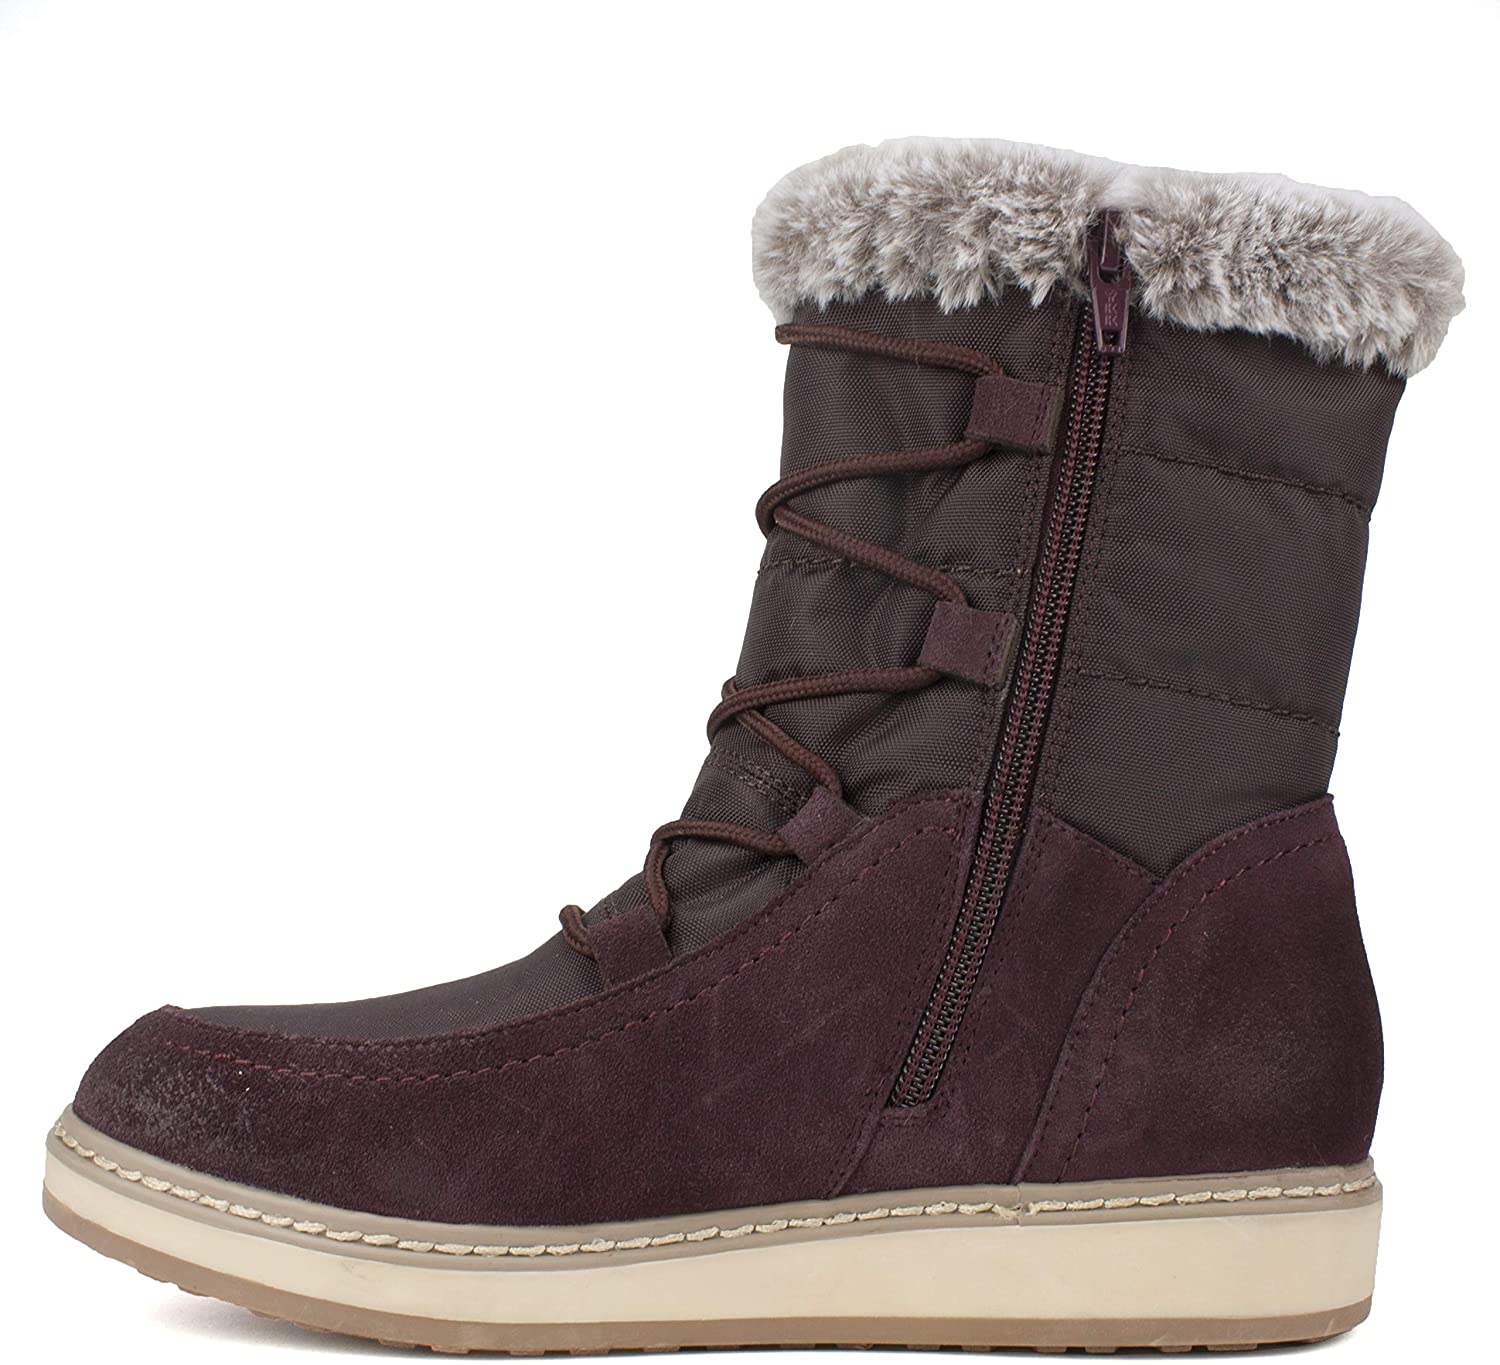 White Mountain Women's Shoes TANSLEY Suede Almond Toe Ankle, Burgundy ...